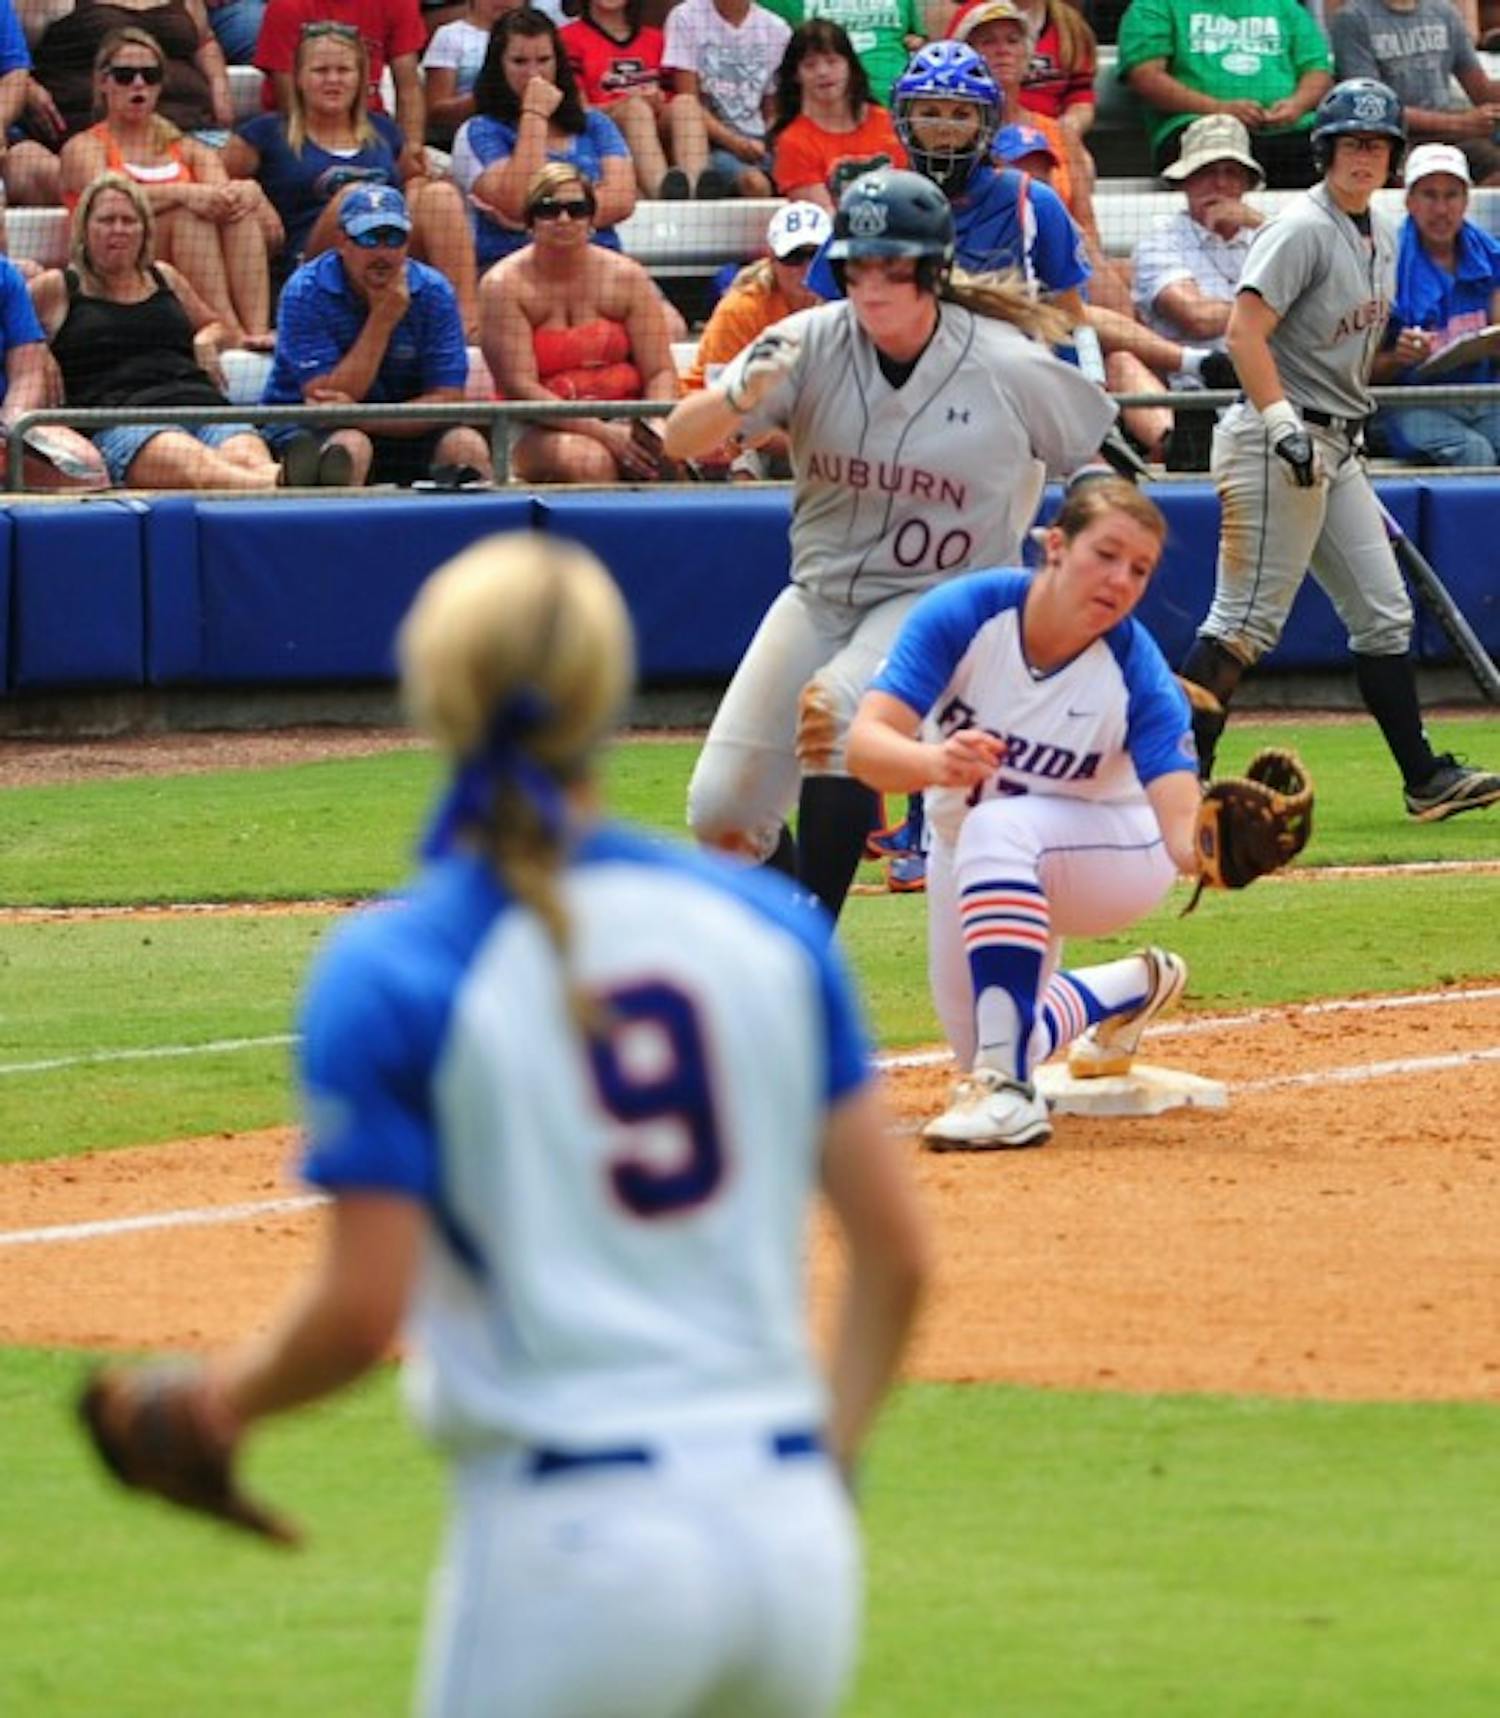 Florida right fielder Kasey Fagan throws out Auburn first baseman Caitlin Jordan during the top of the sixth inning of the Gators’ 5-1 win on Sunday.